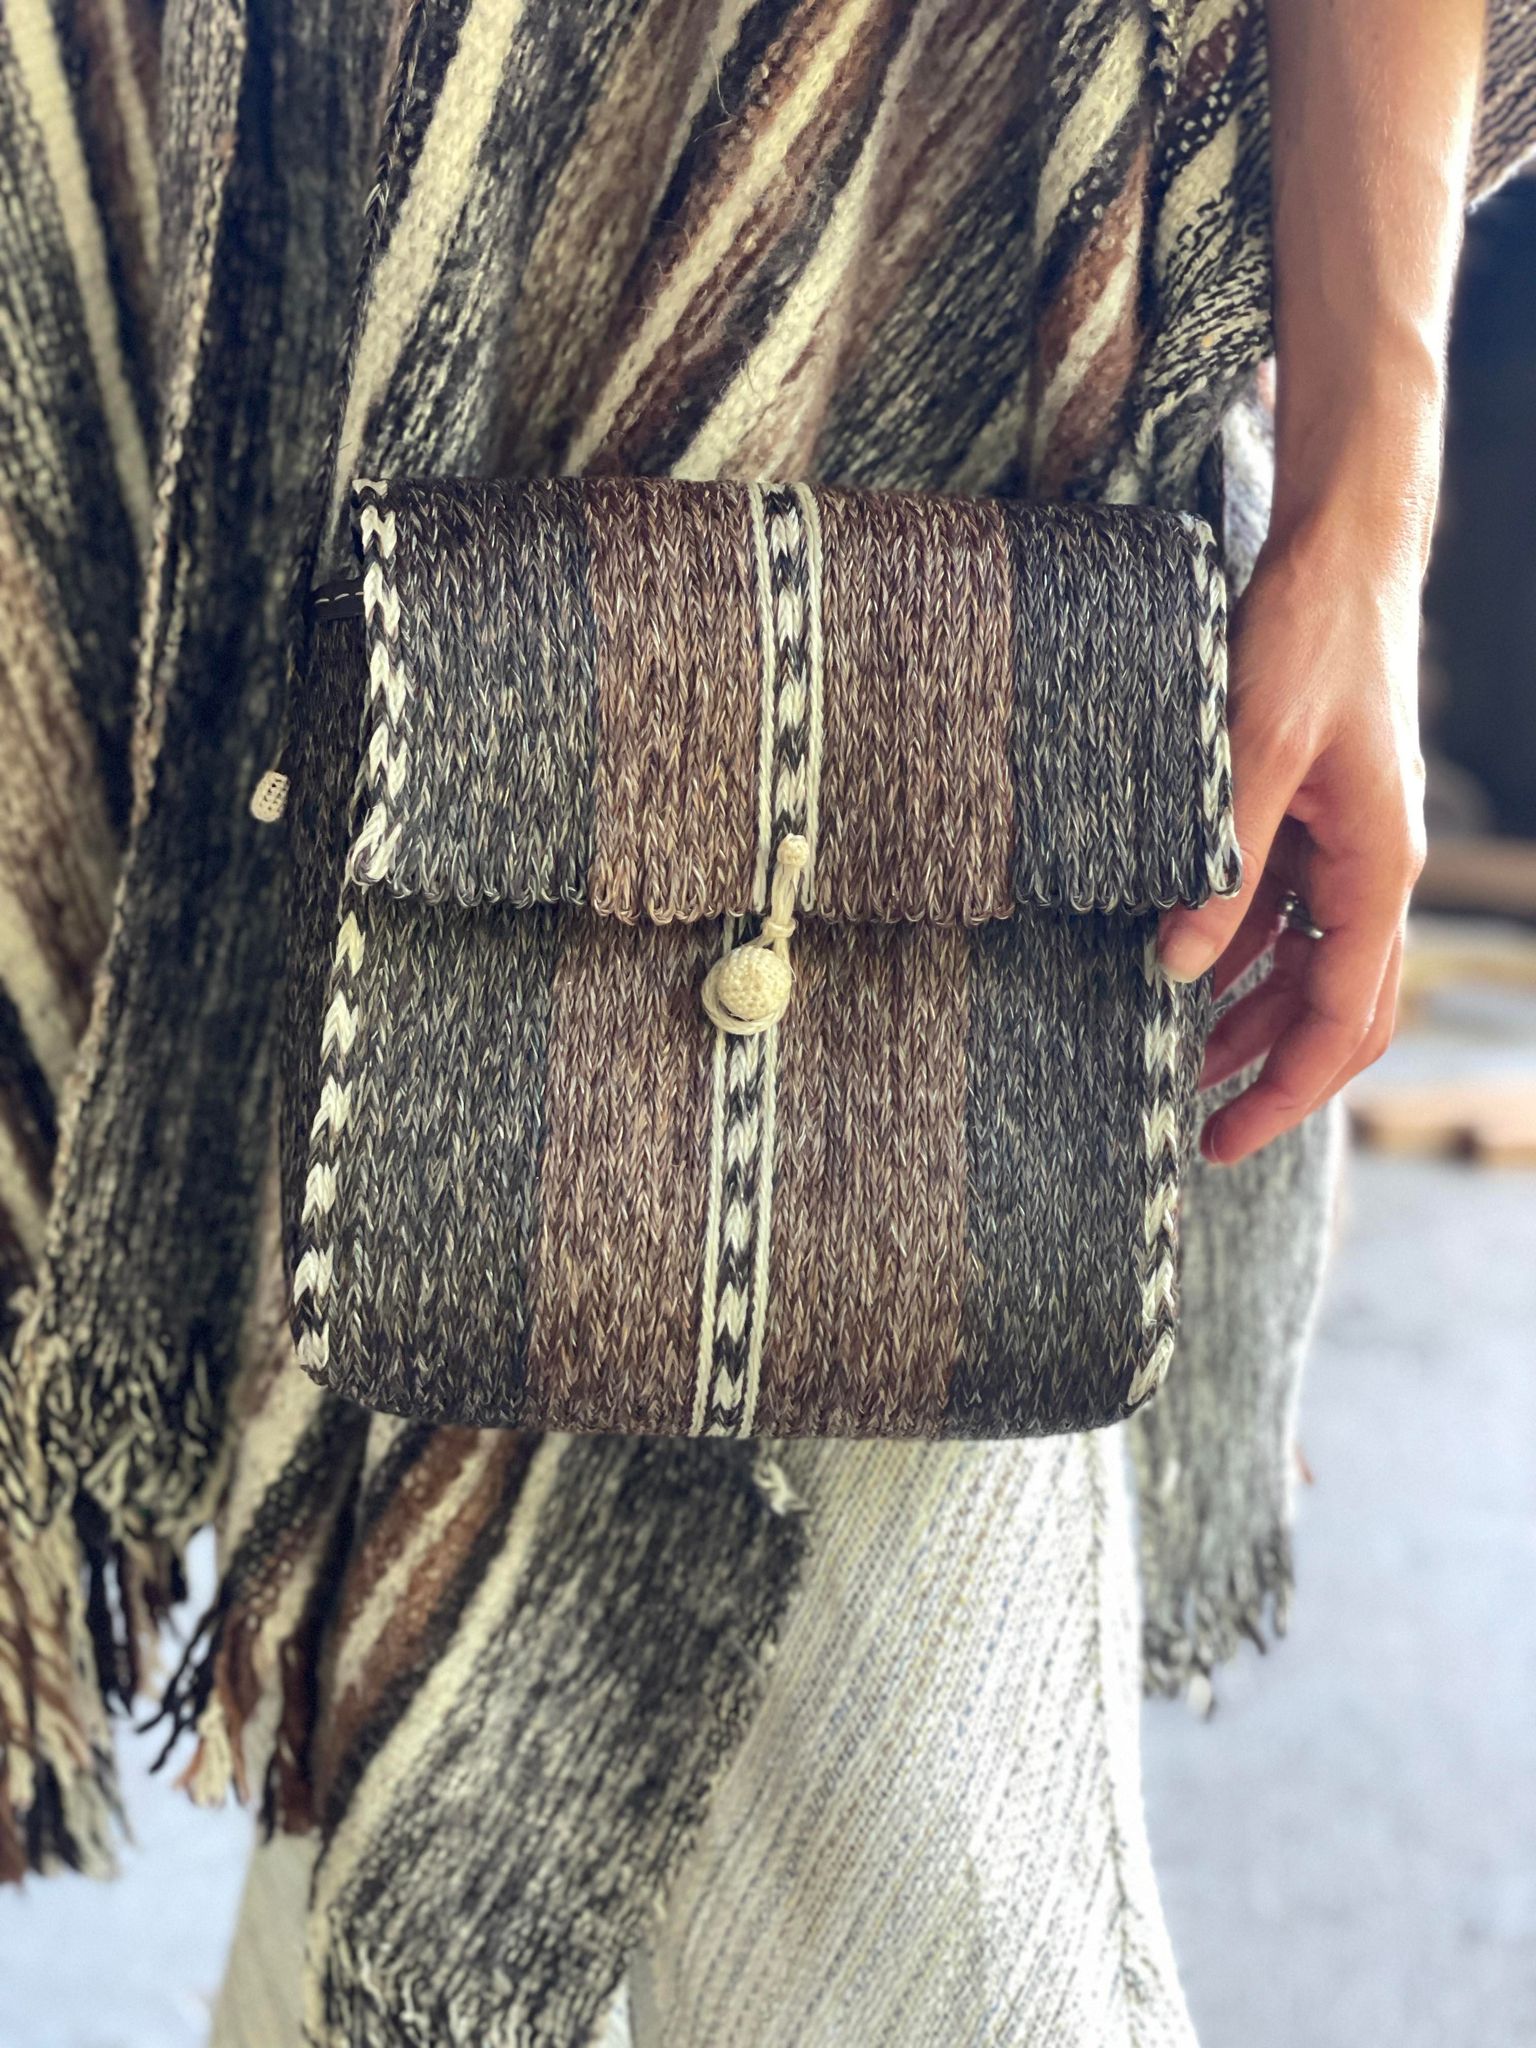 Hand Hitched Horsehair Purse